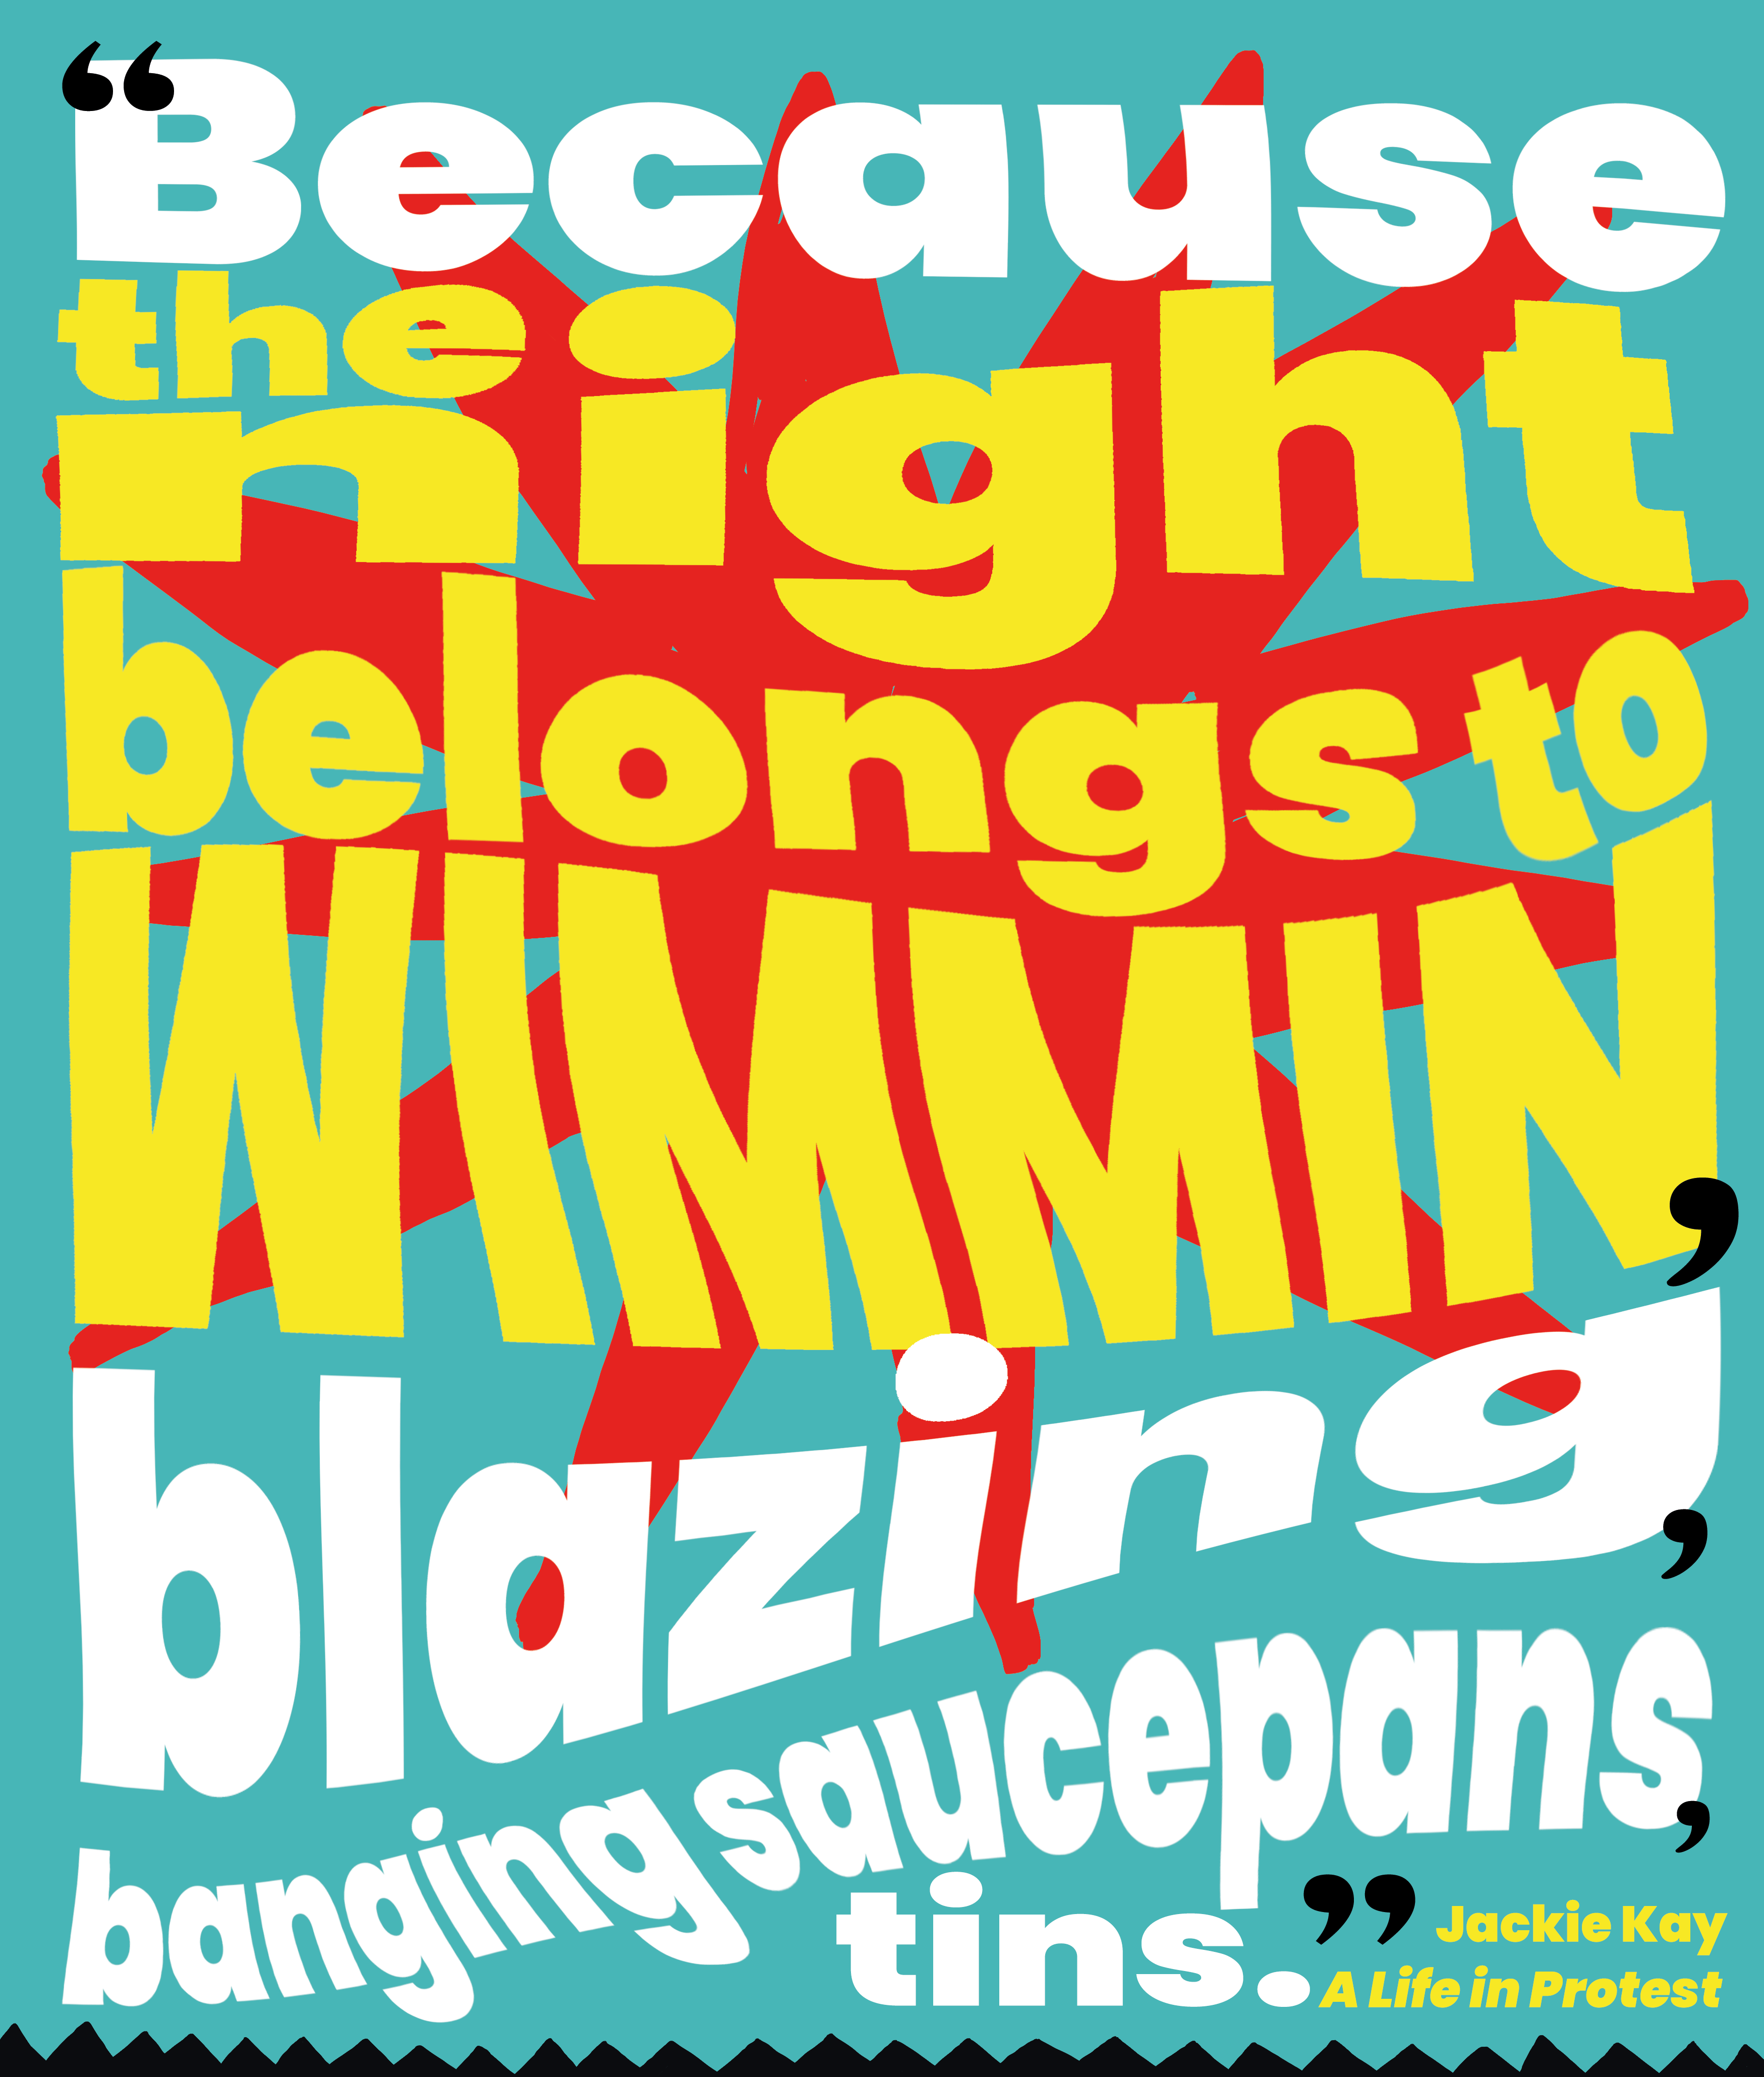 A quote reads 'Because the night belongs to Wimmin blazing banging saucepan tins' by Jackie Kay. It is bold text on a blue and red background